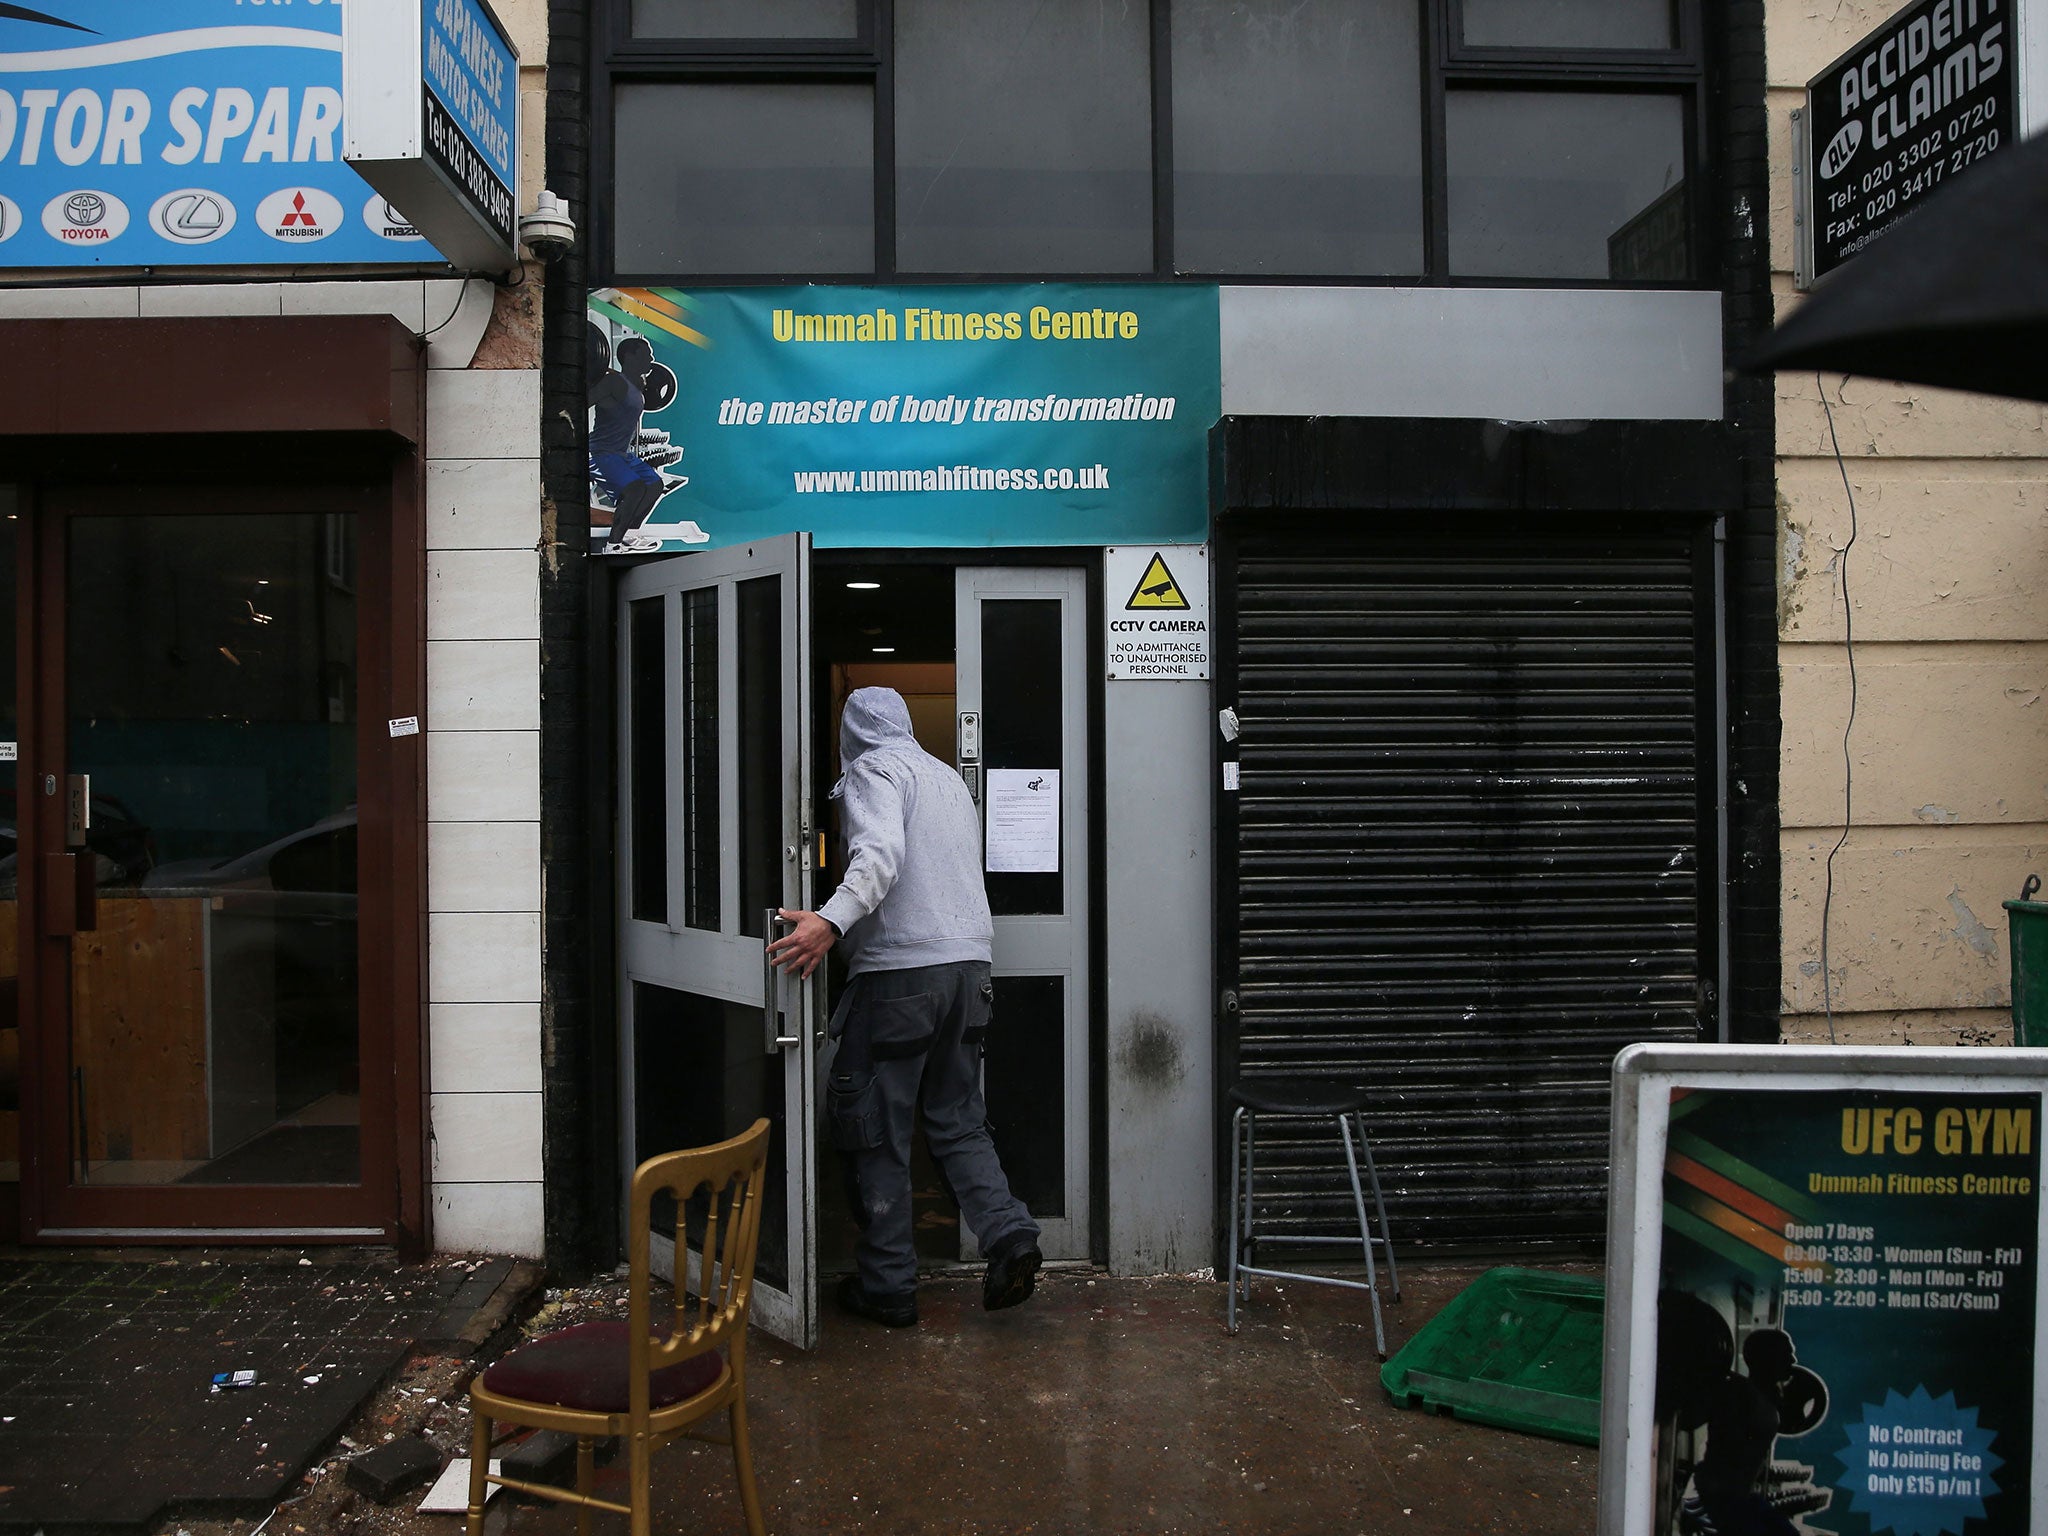 The Ummah Fitness Centre in Ilford (AFP/Getty)